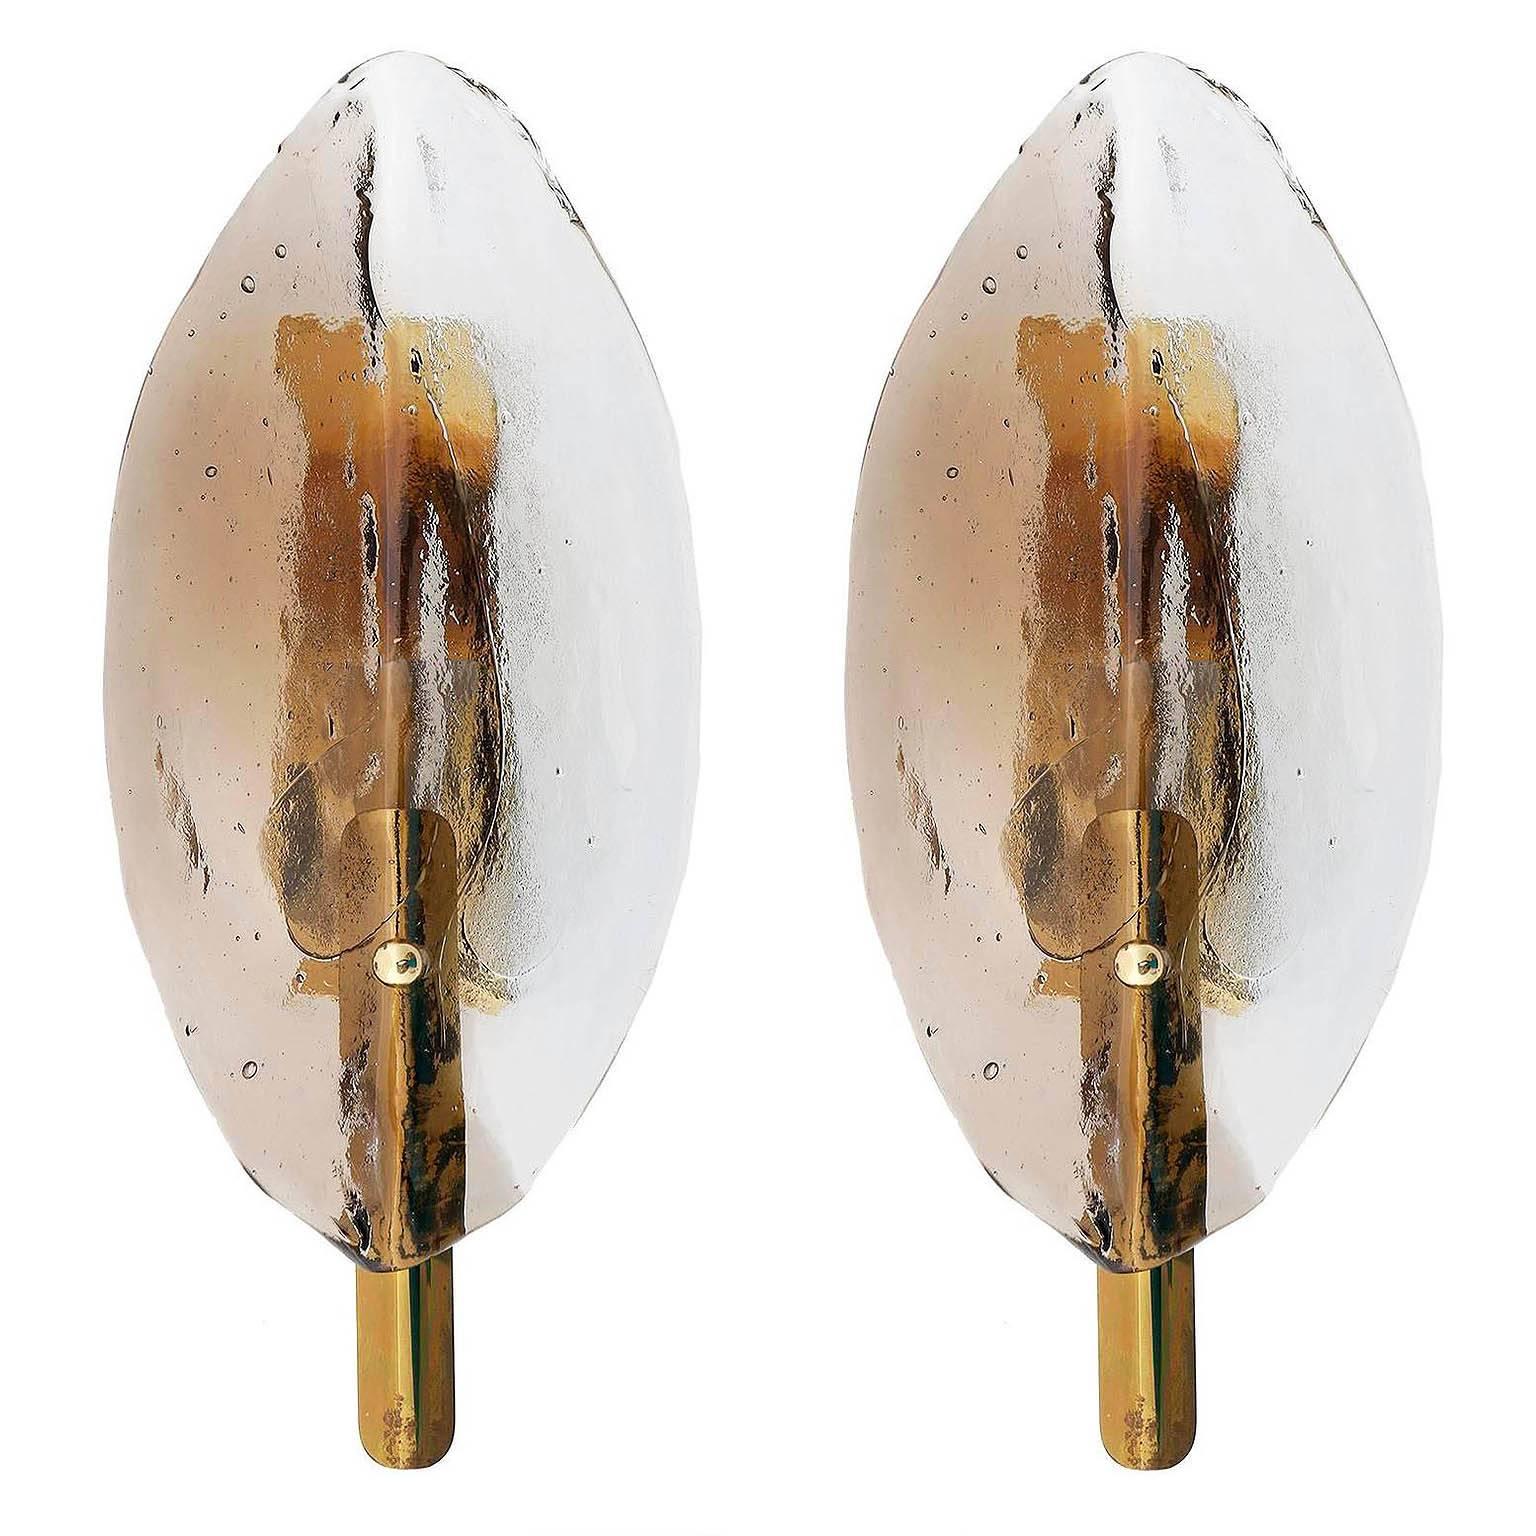 Three beautiful J.T. Kalmar wall lights, manufactured in midcentury, circa 1970 (end of 1960s and beginning of 1970s).
A leaf-shaped two-tone (clear and smoked or amber) Murano glass with a brass fixture.
Excellent condition with little patina to